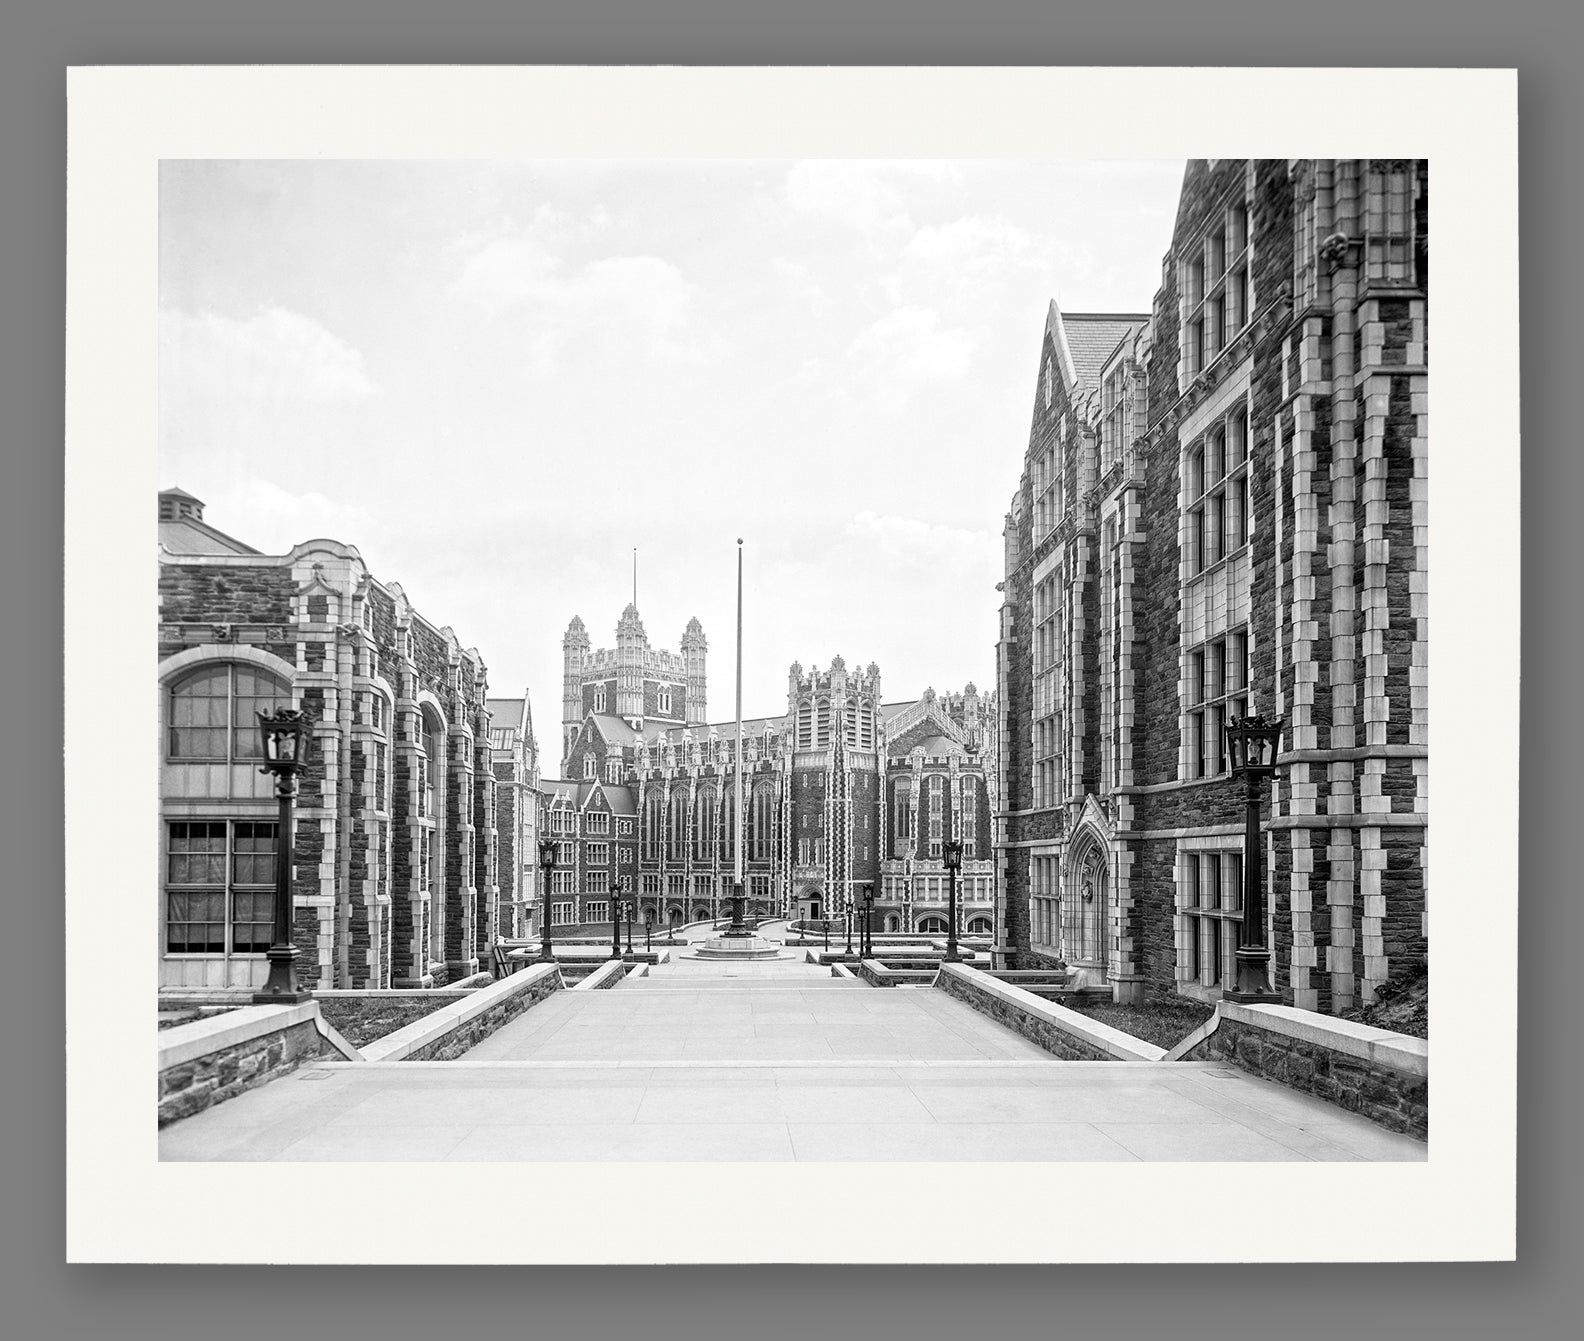 A paper print mockup of a vintage photograph of City College's campus in New York City